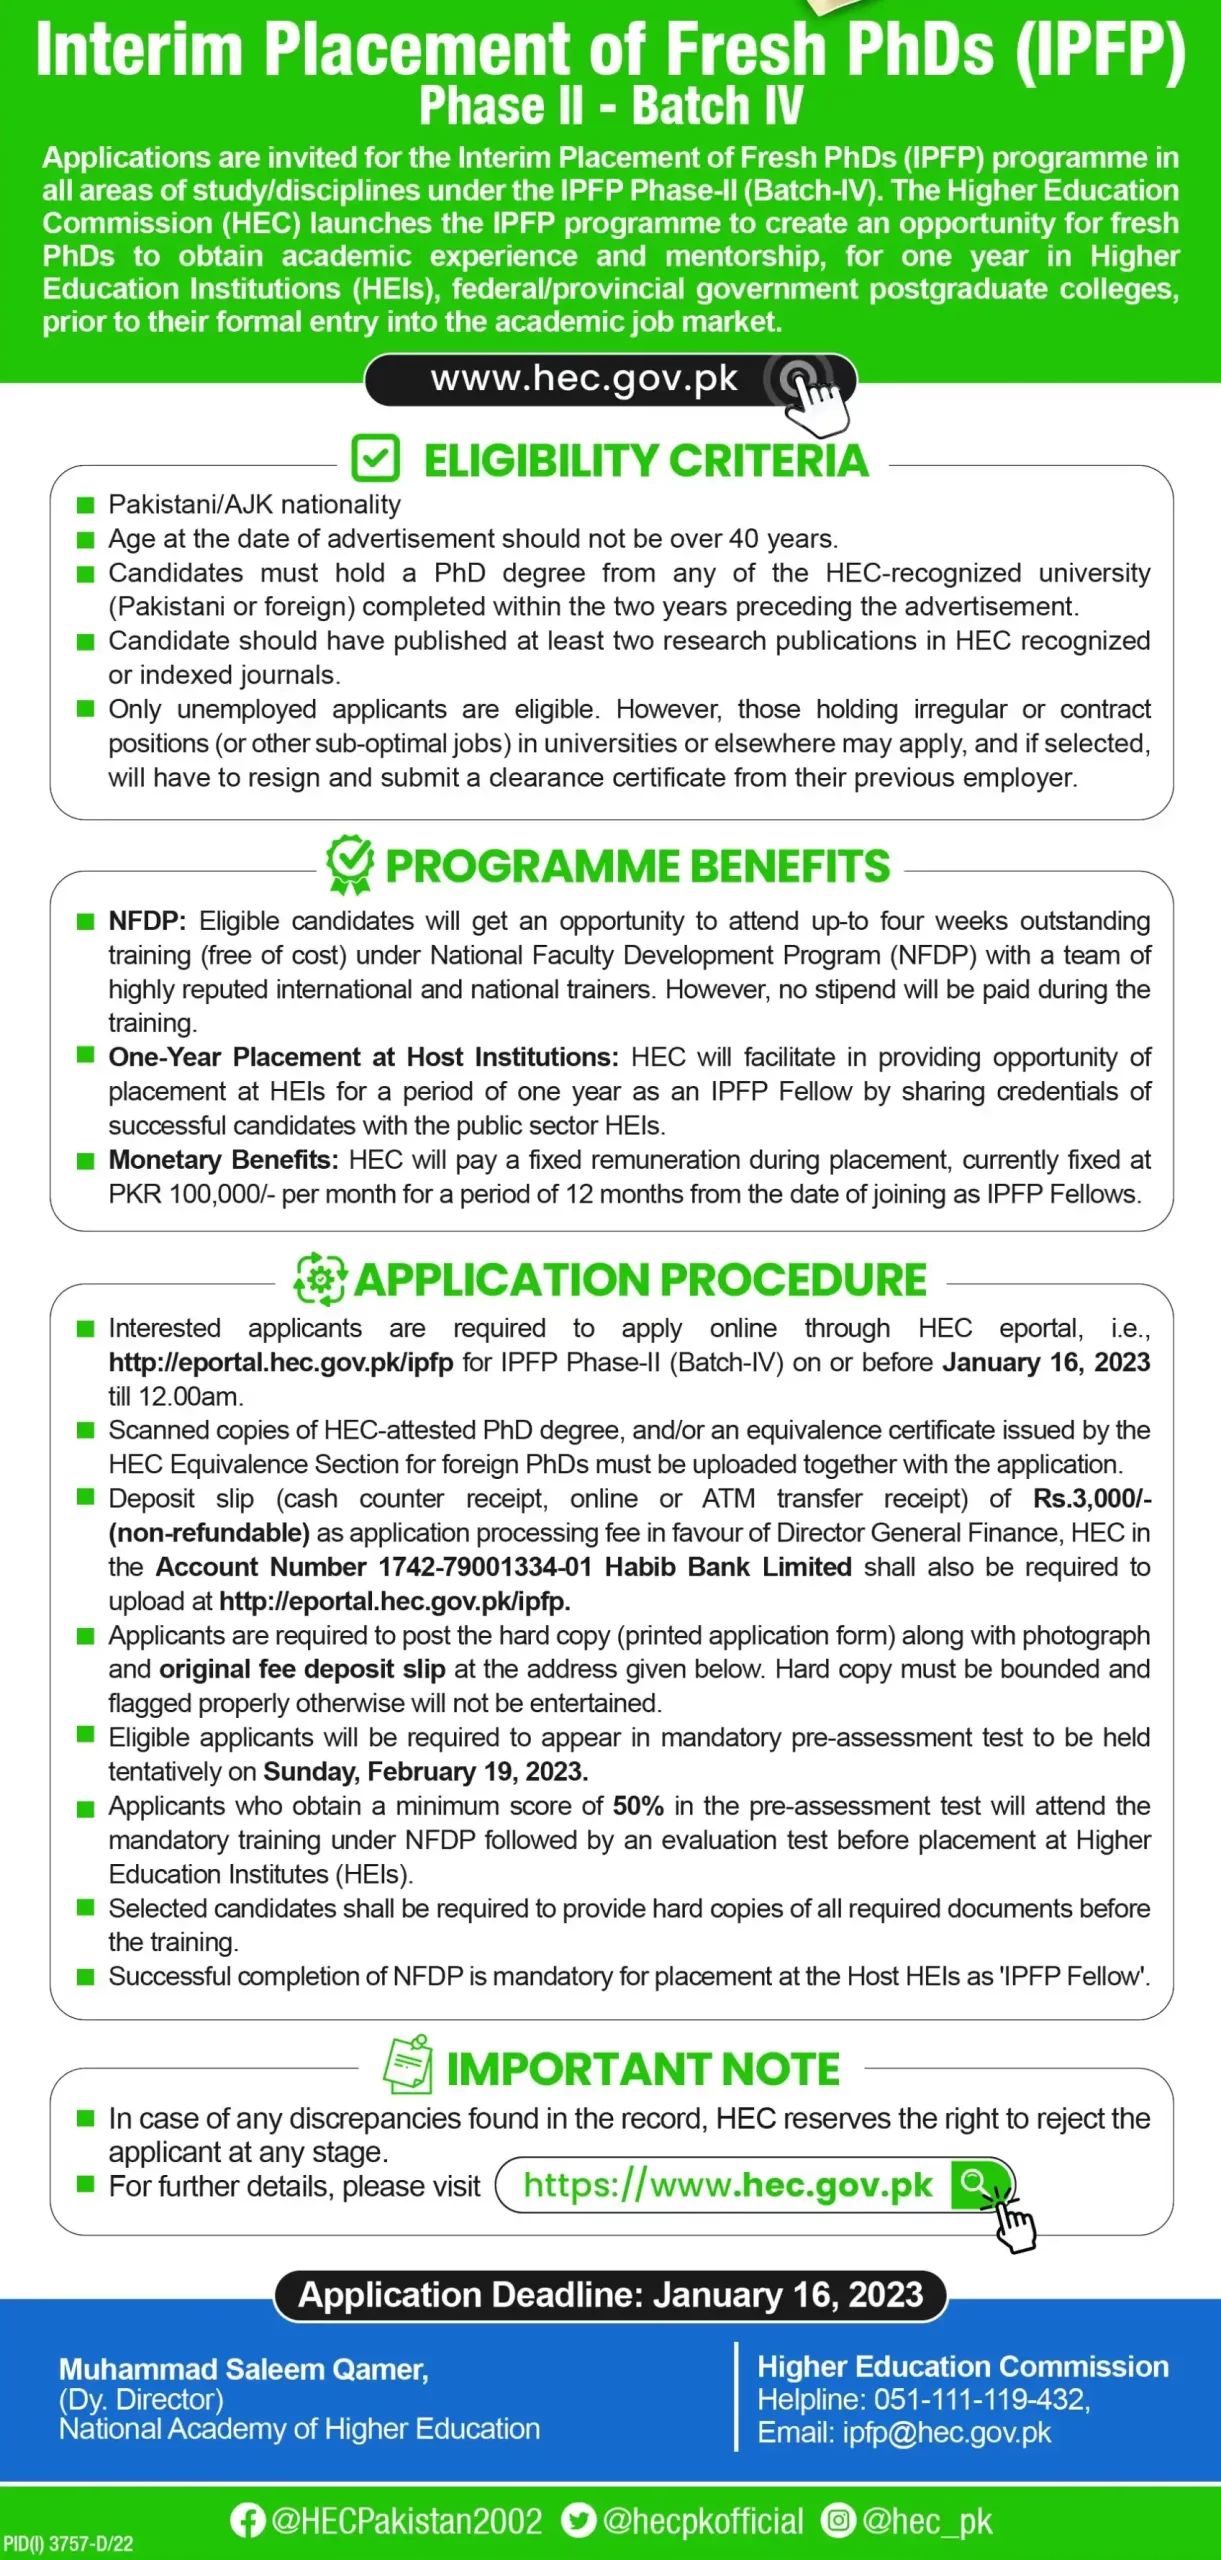 HEC Interim Placement of Fresh PhDs (IPFP) Phase-II 2023